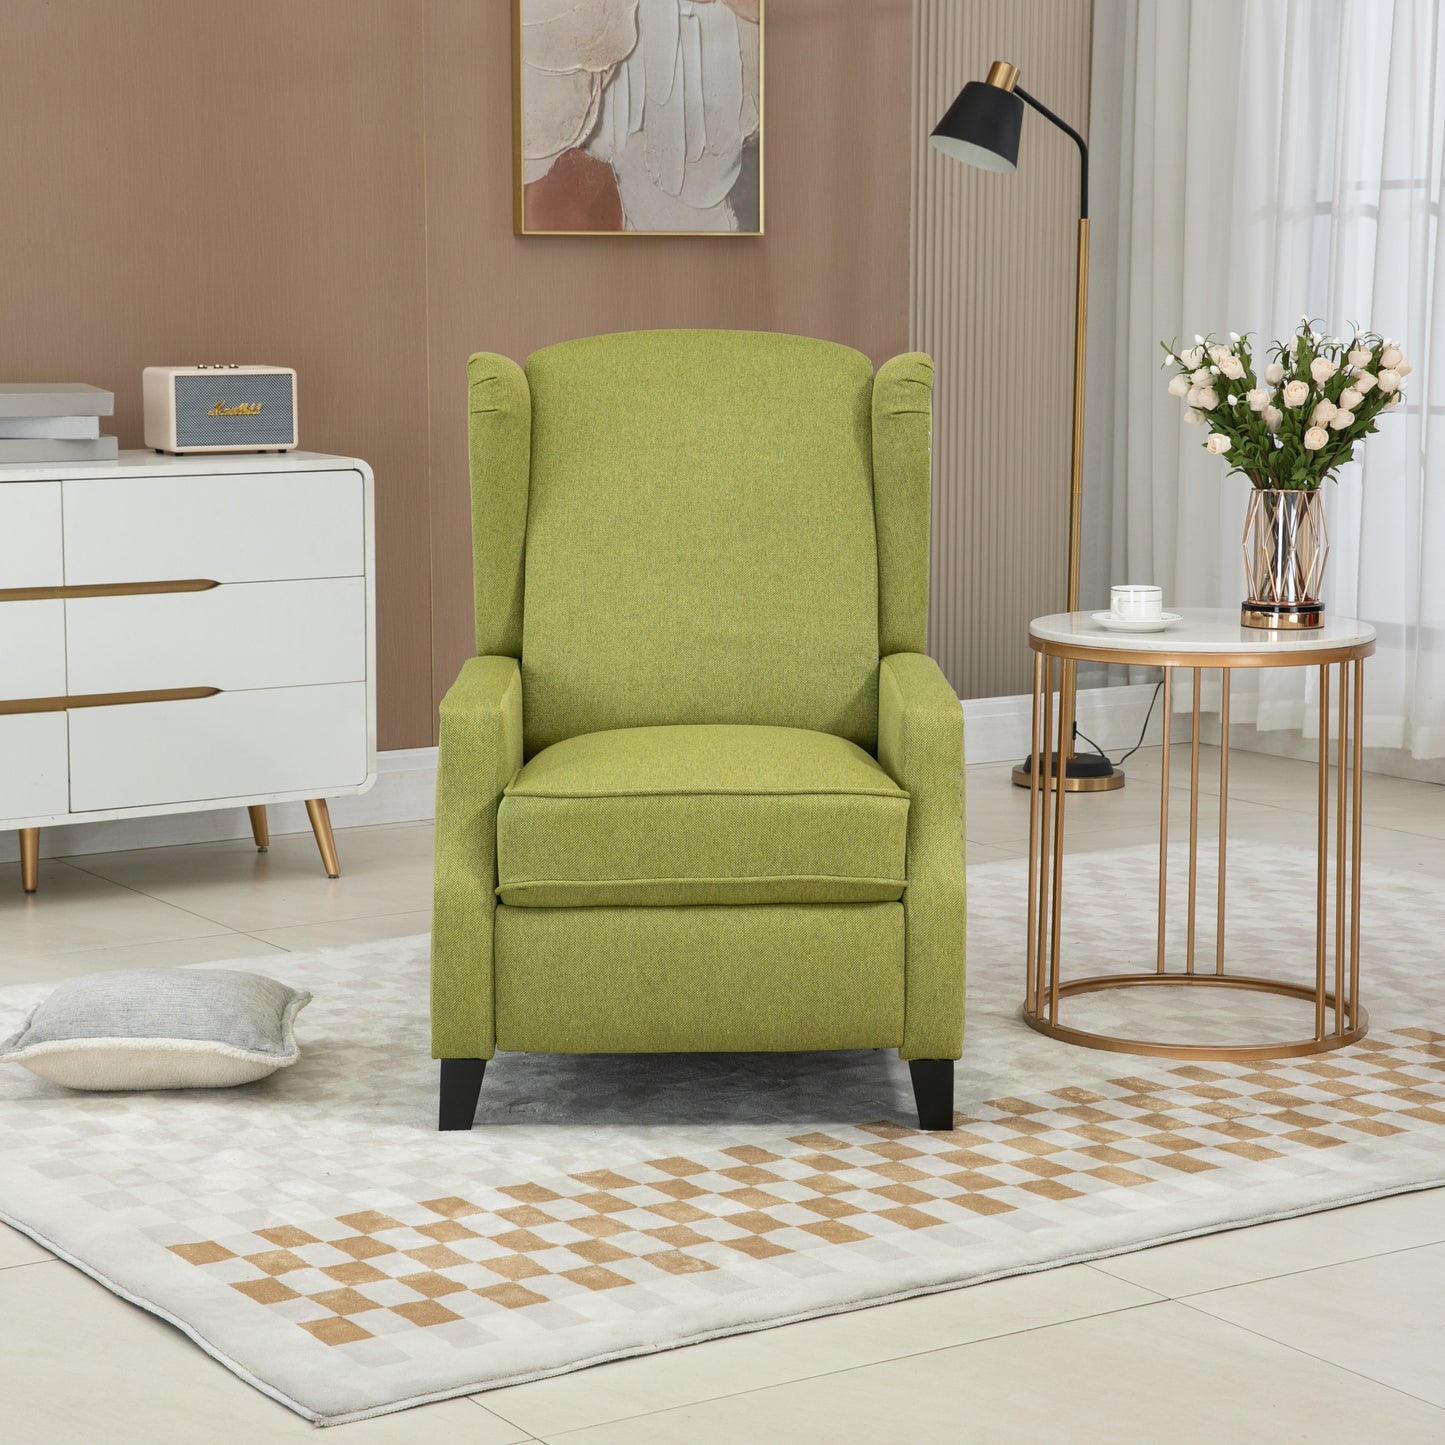 Modern Olive Green Upholstered Recliner Chair for Stylish Living Spaces